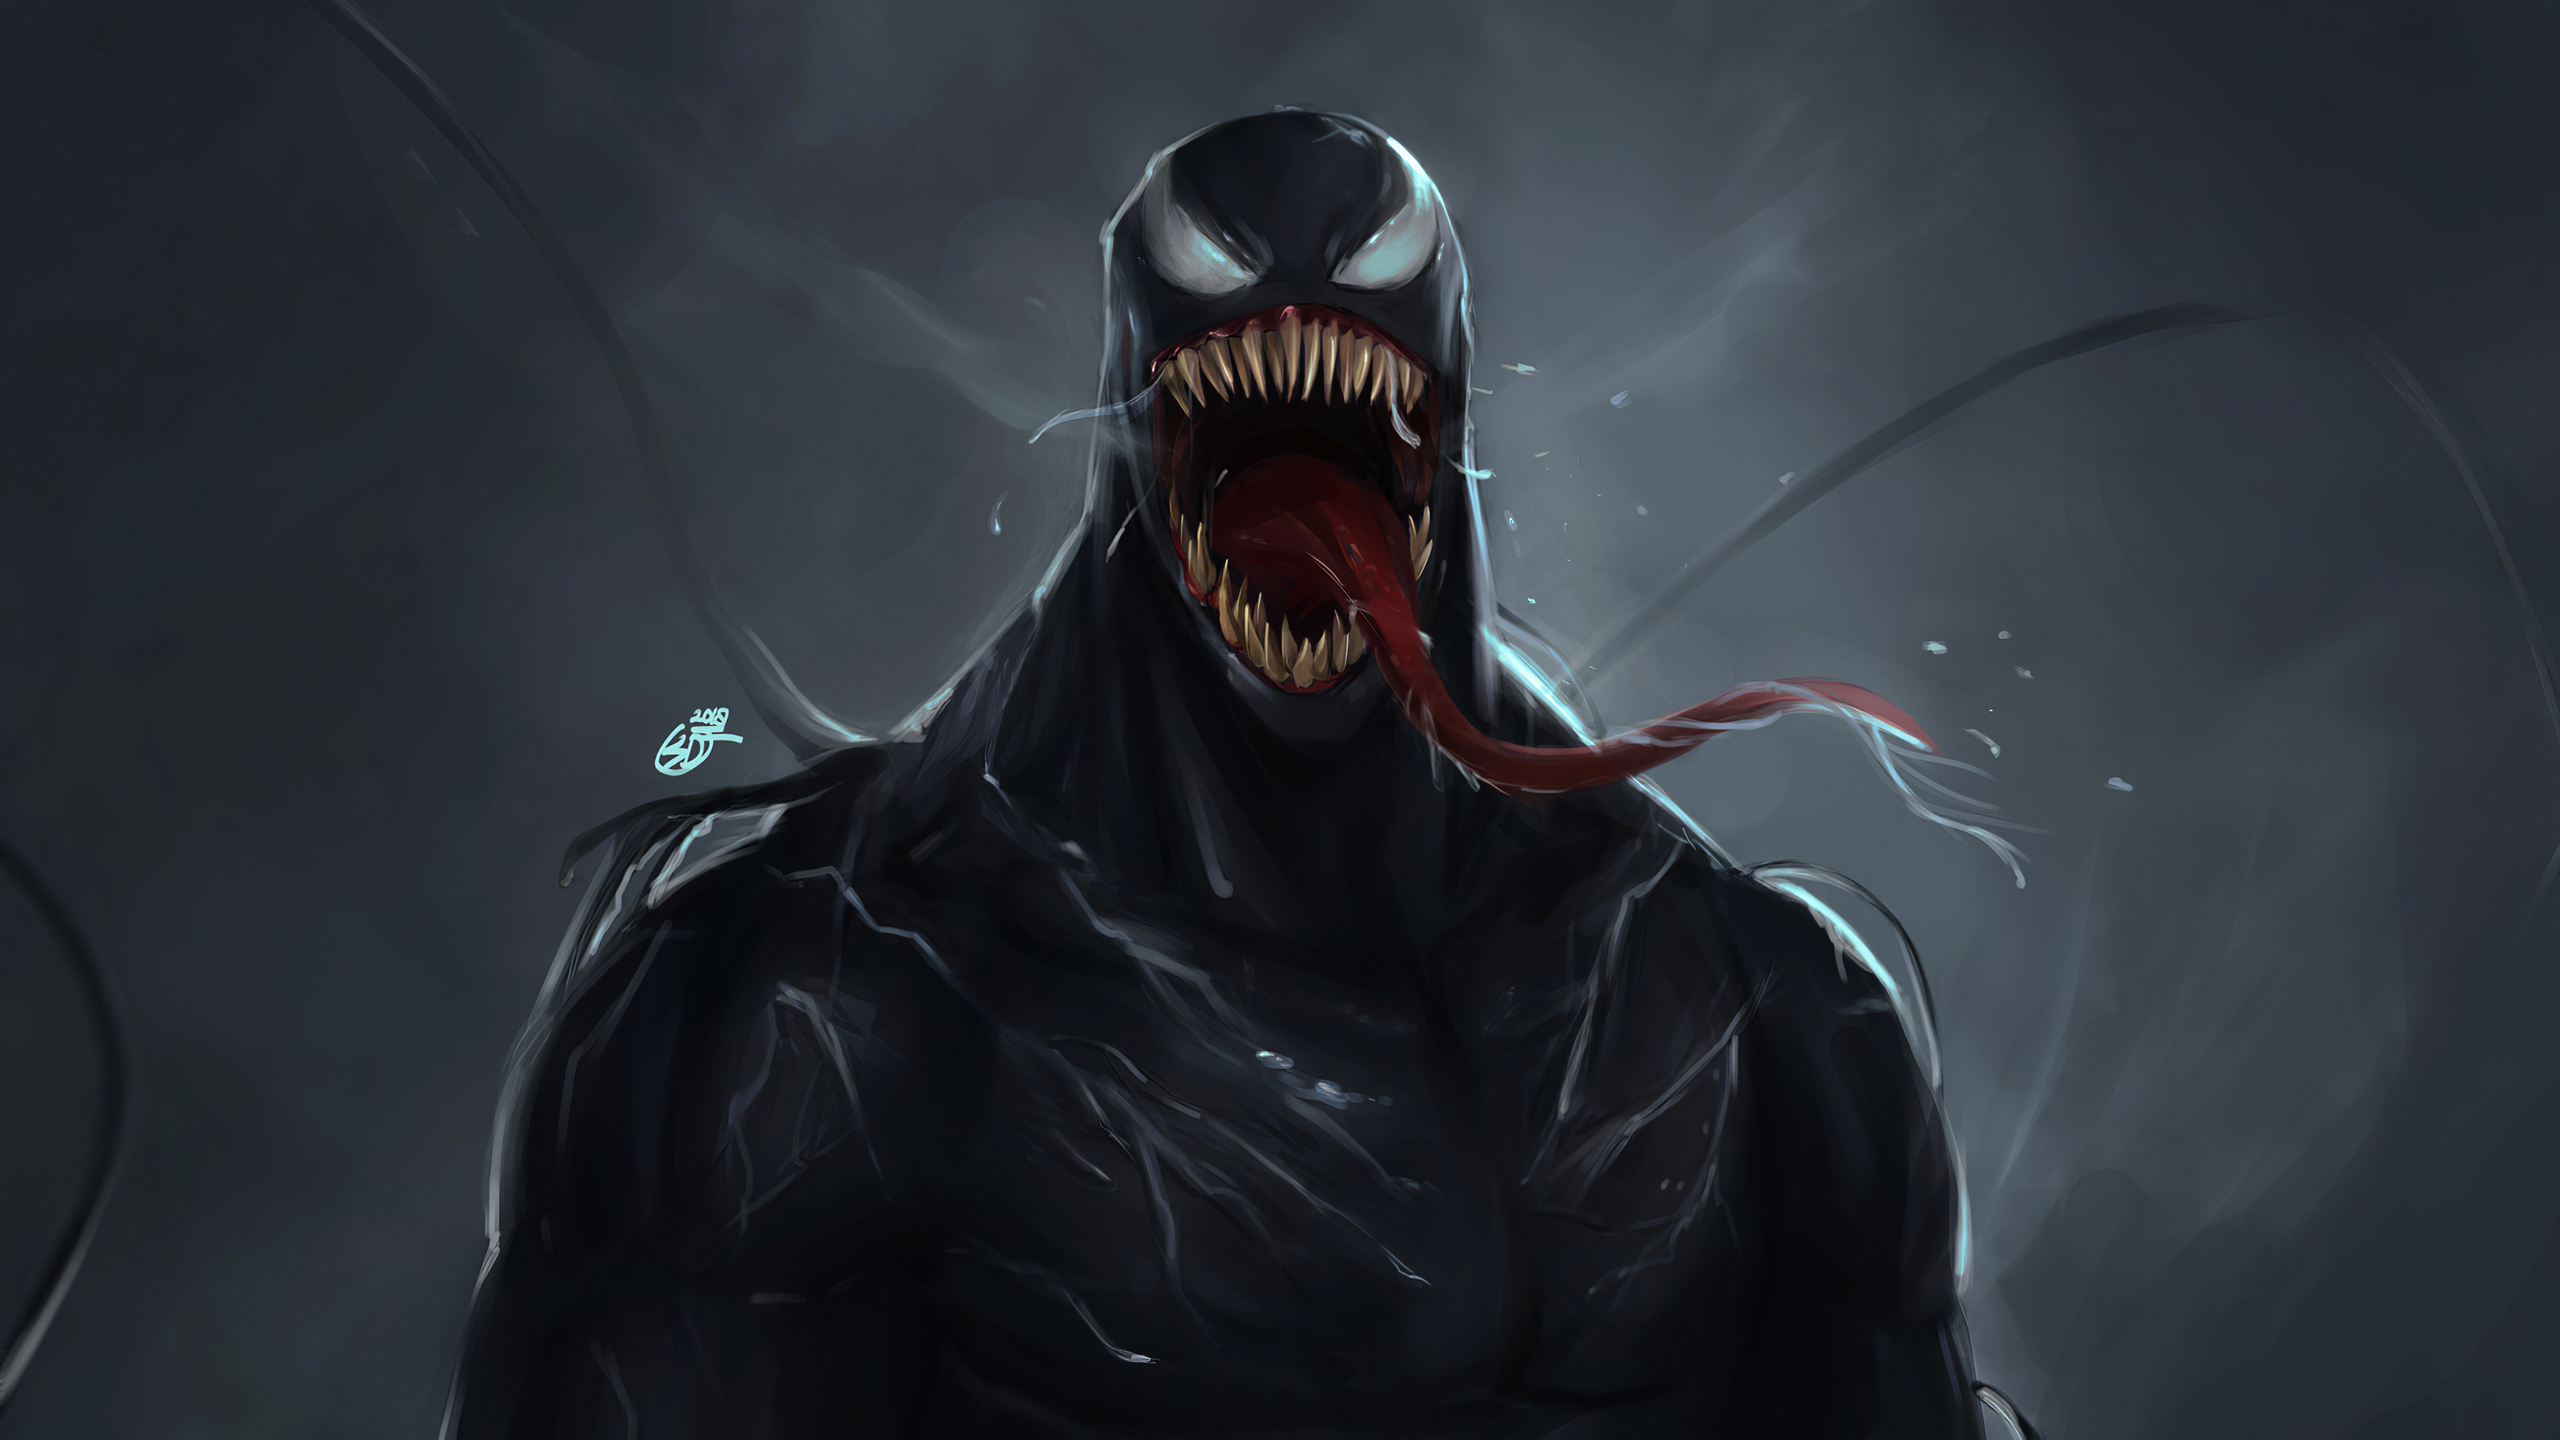 Venom 4k2020 1440P Resolution HD 4k Wallpaper, Image, Background, Photo and Picture